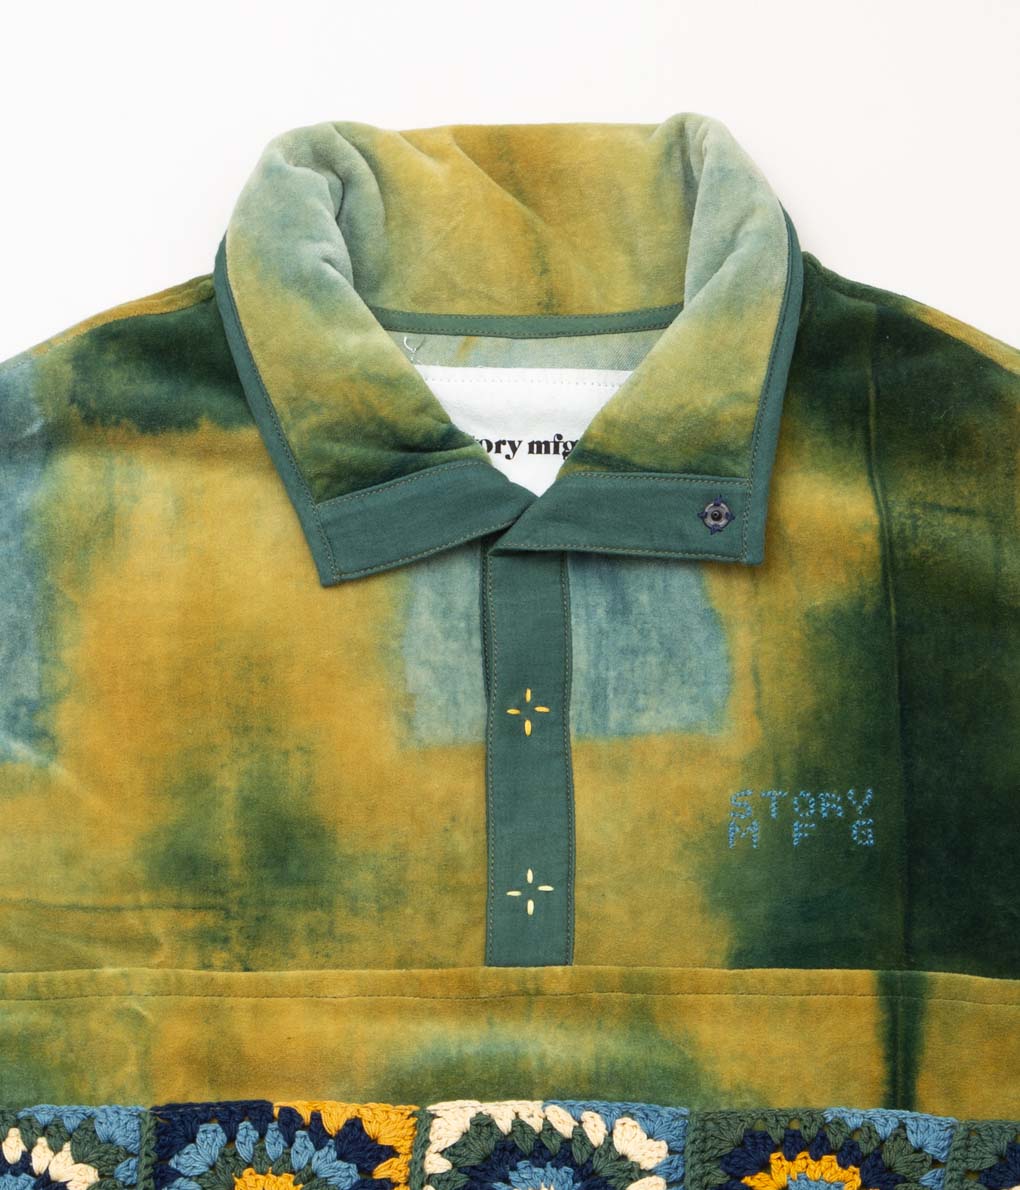 STORY MFG. "POLITE PULLOVER"(GRASS CLAMP)